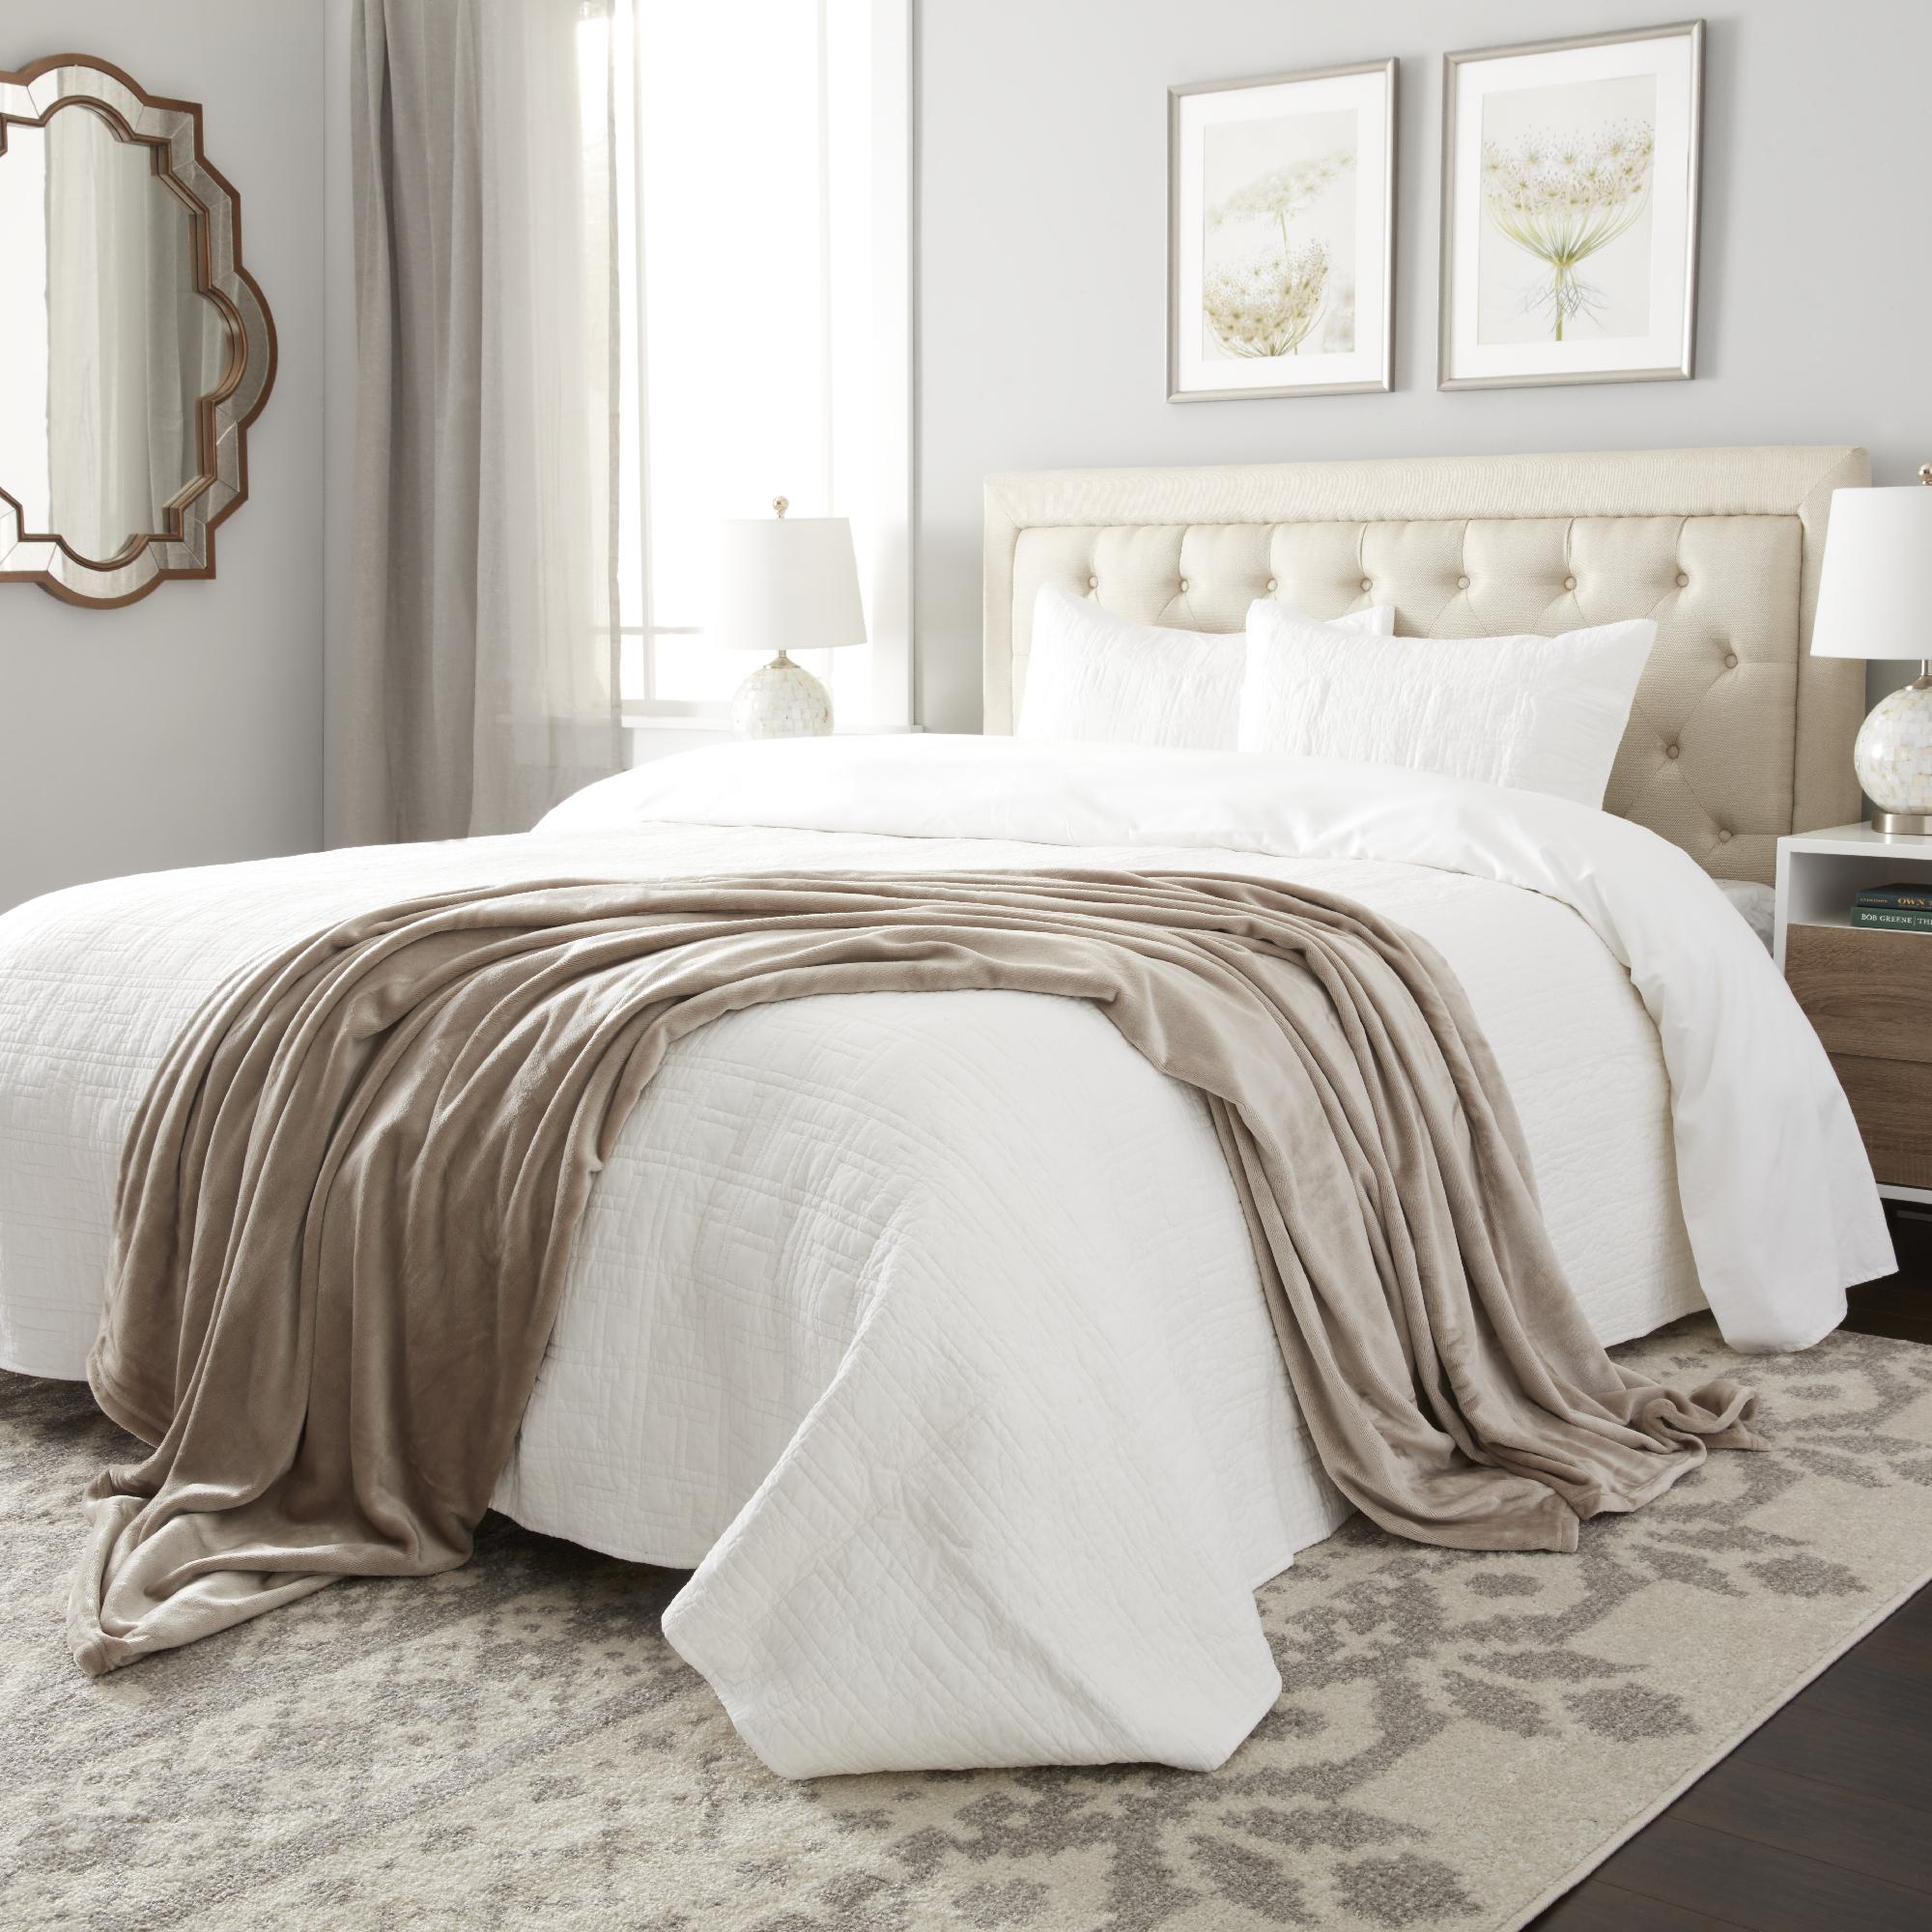 save an extra 20% on Select Bedding*